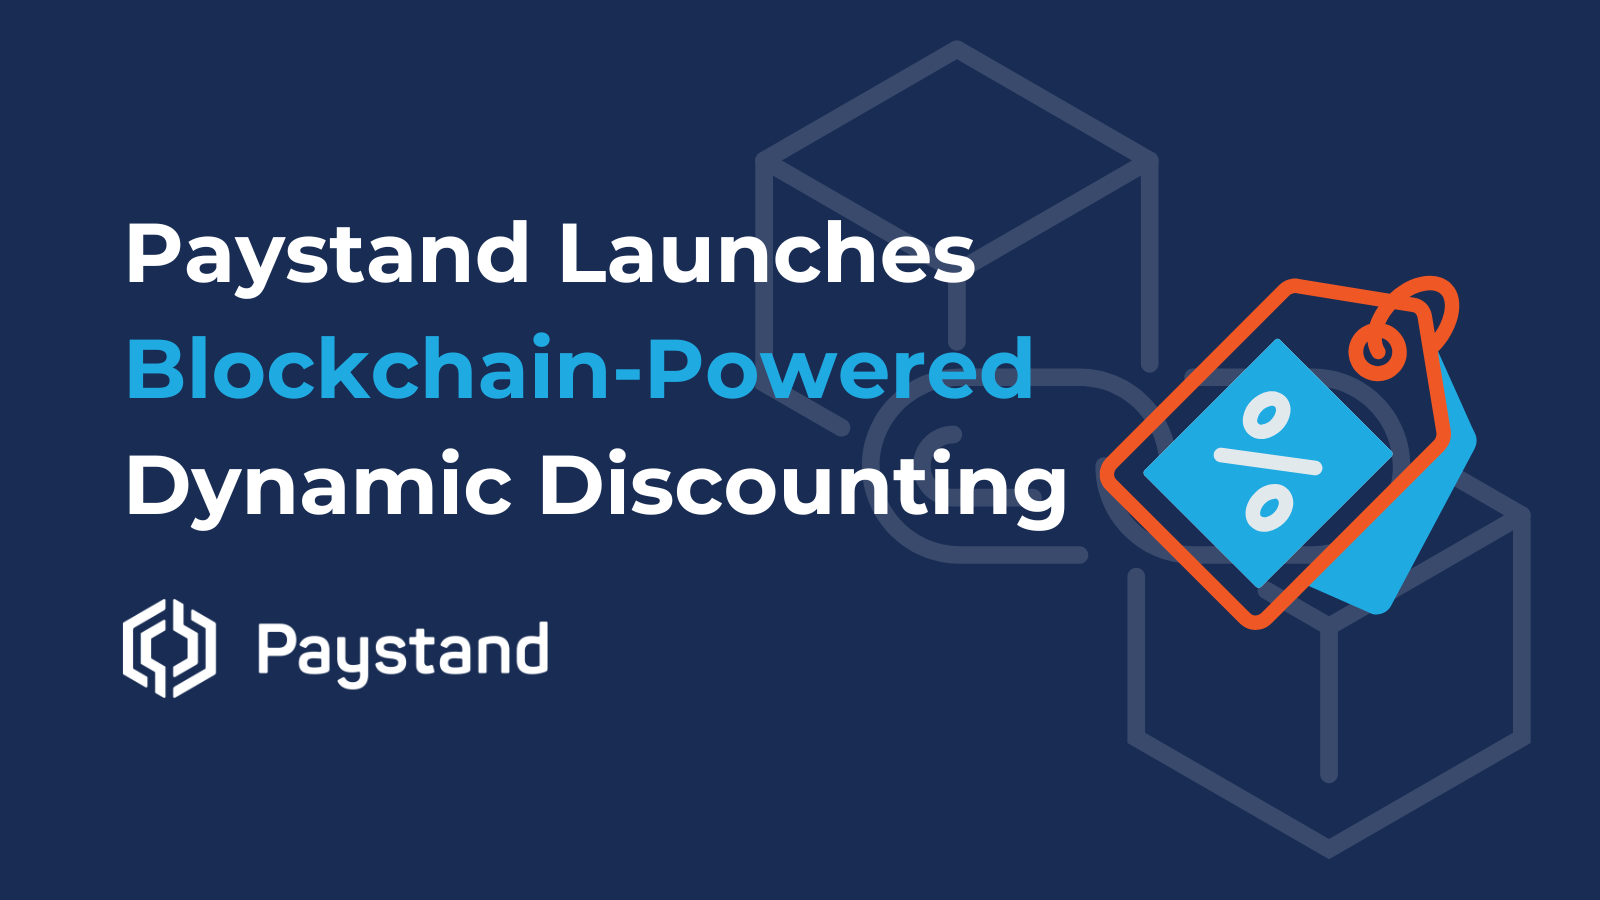 Paystand Launches the World’s First AR-Centric Dynamic Discounting Application, Powered by Blockchain Smart Contracts